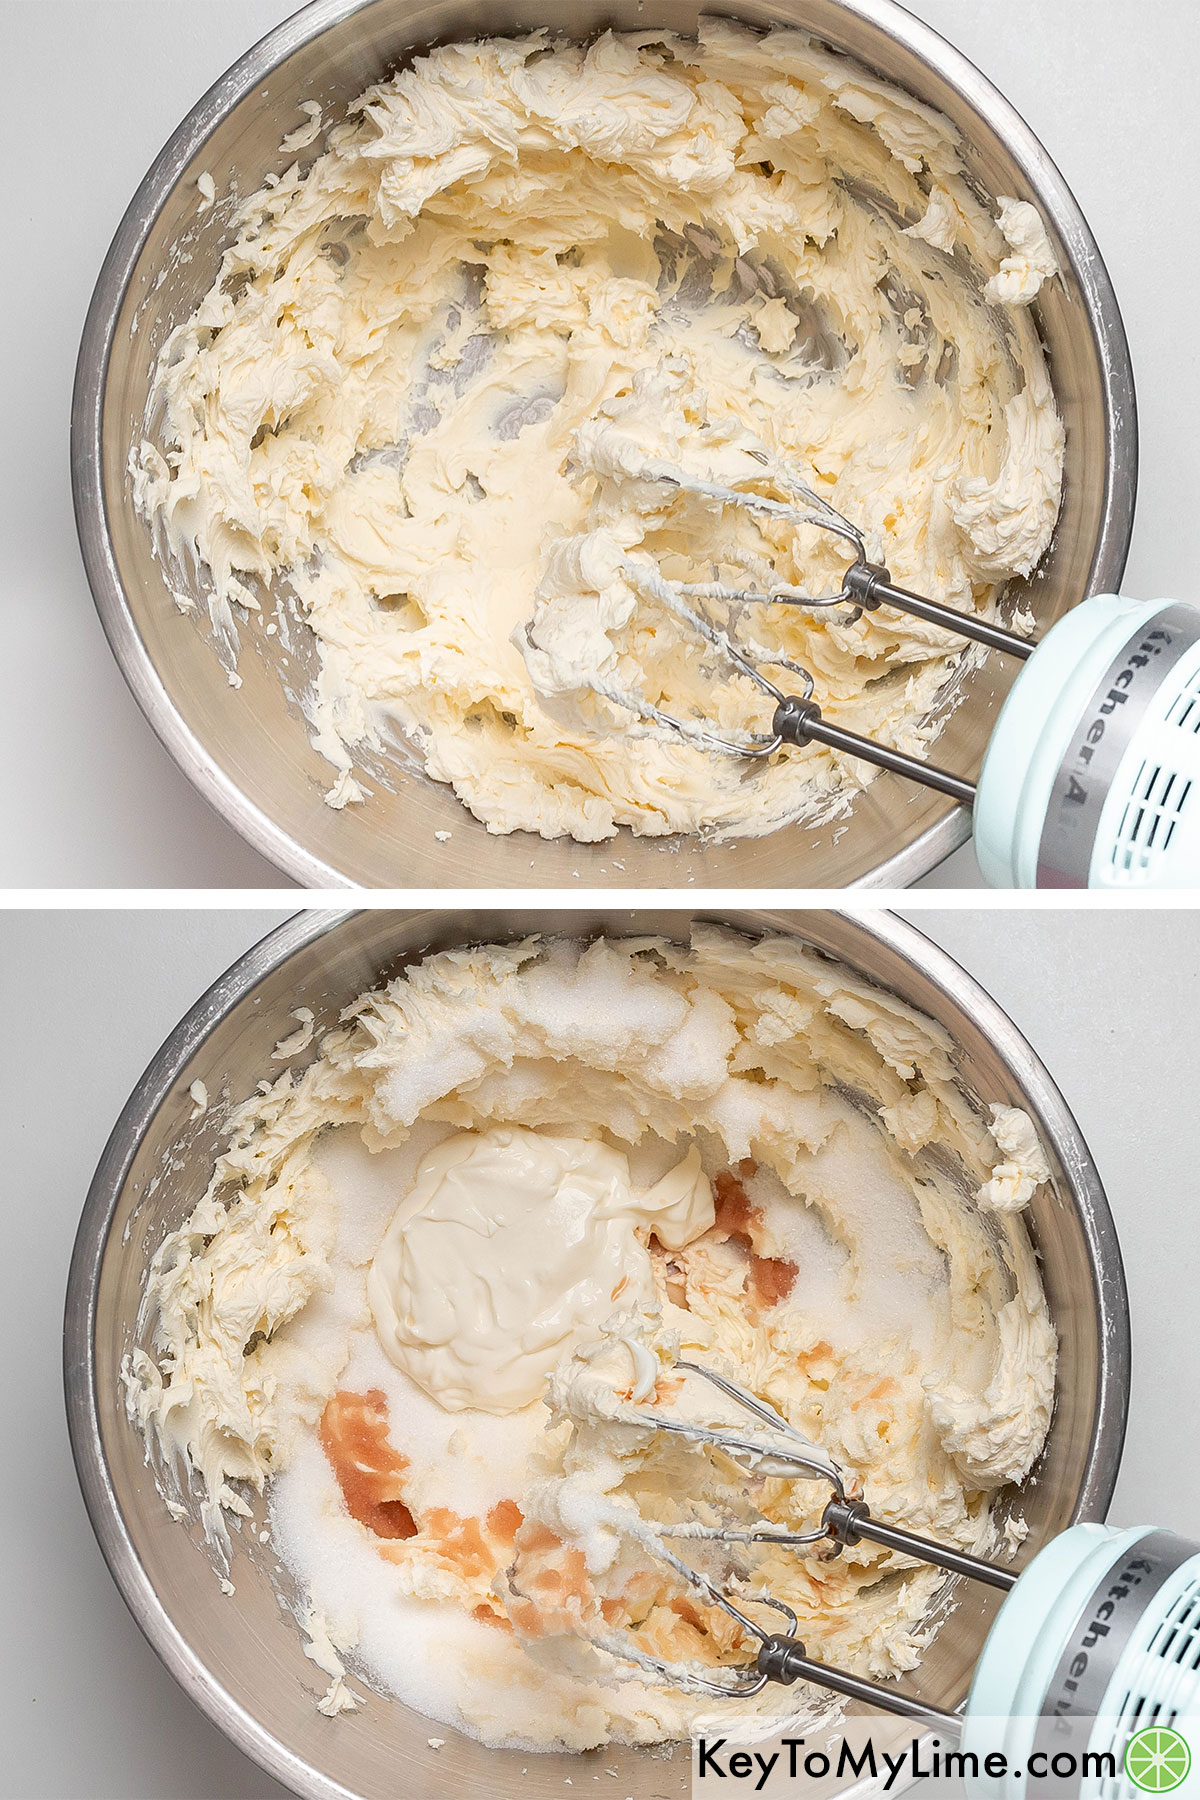 Beating the cream cheese in a large mixing bowl then adding and beating in sour cream, vanilla and sugar.